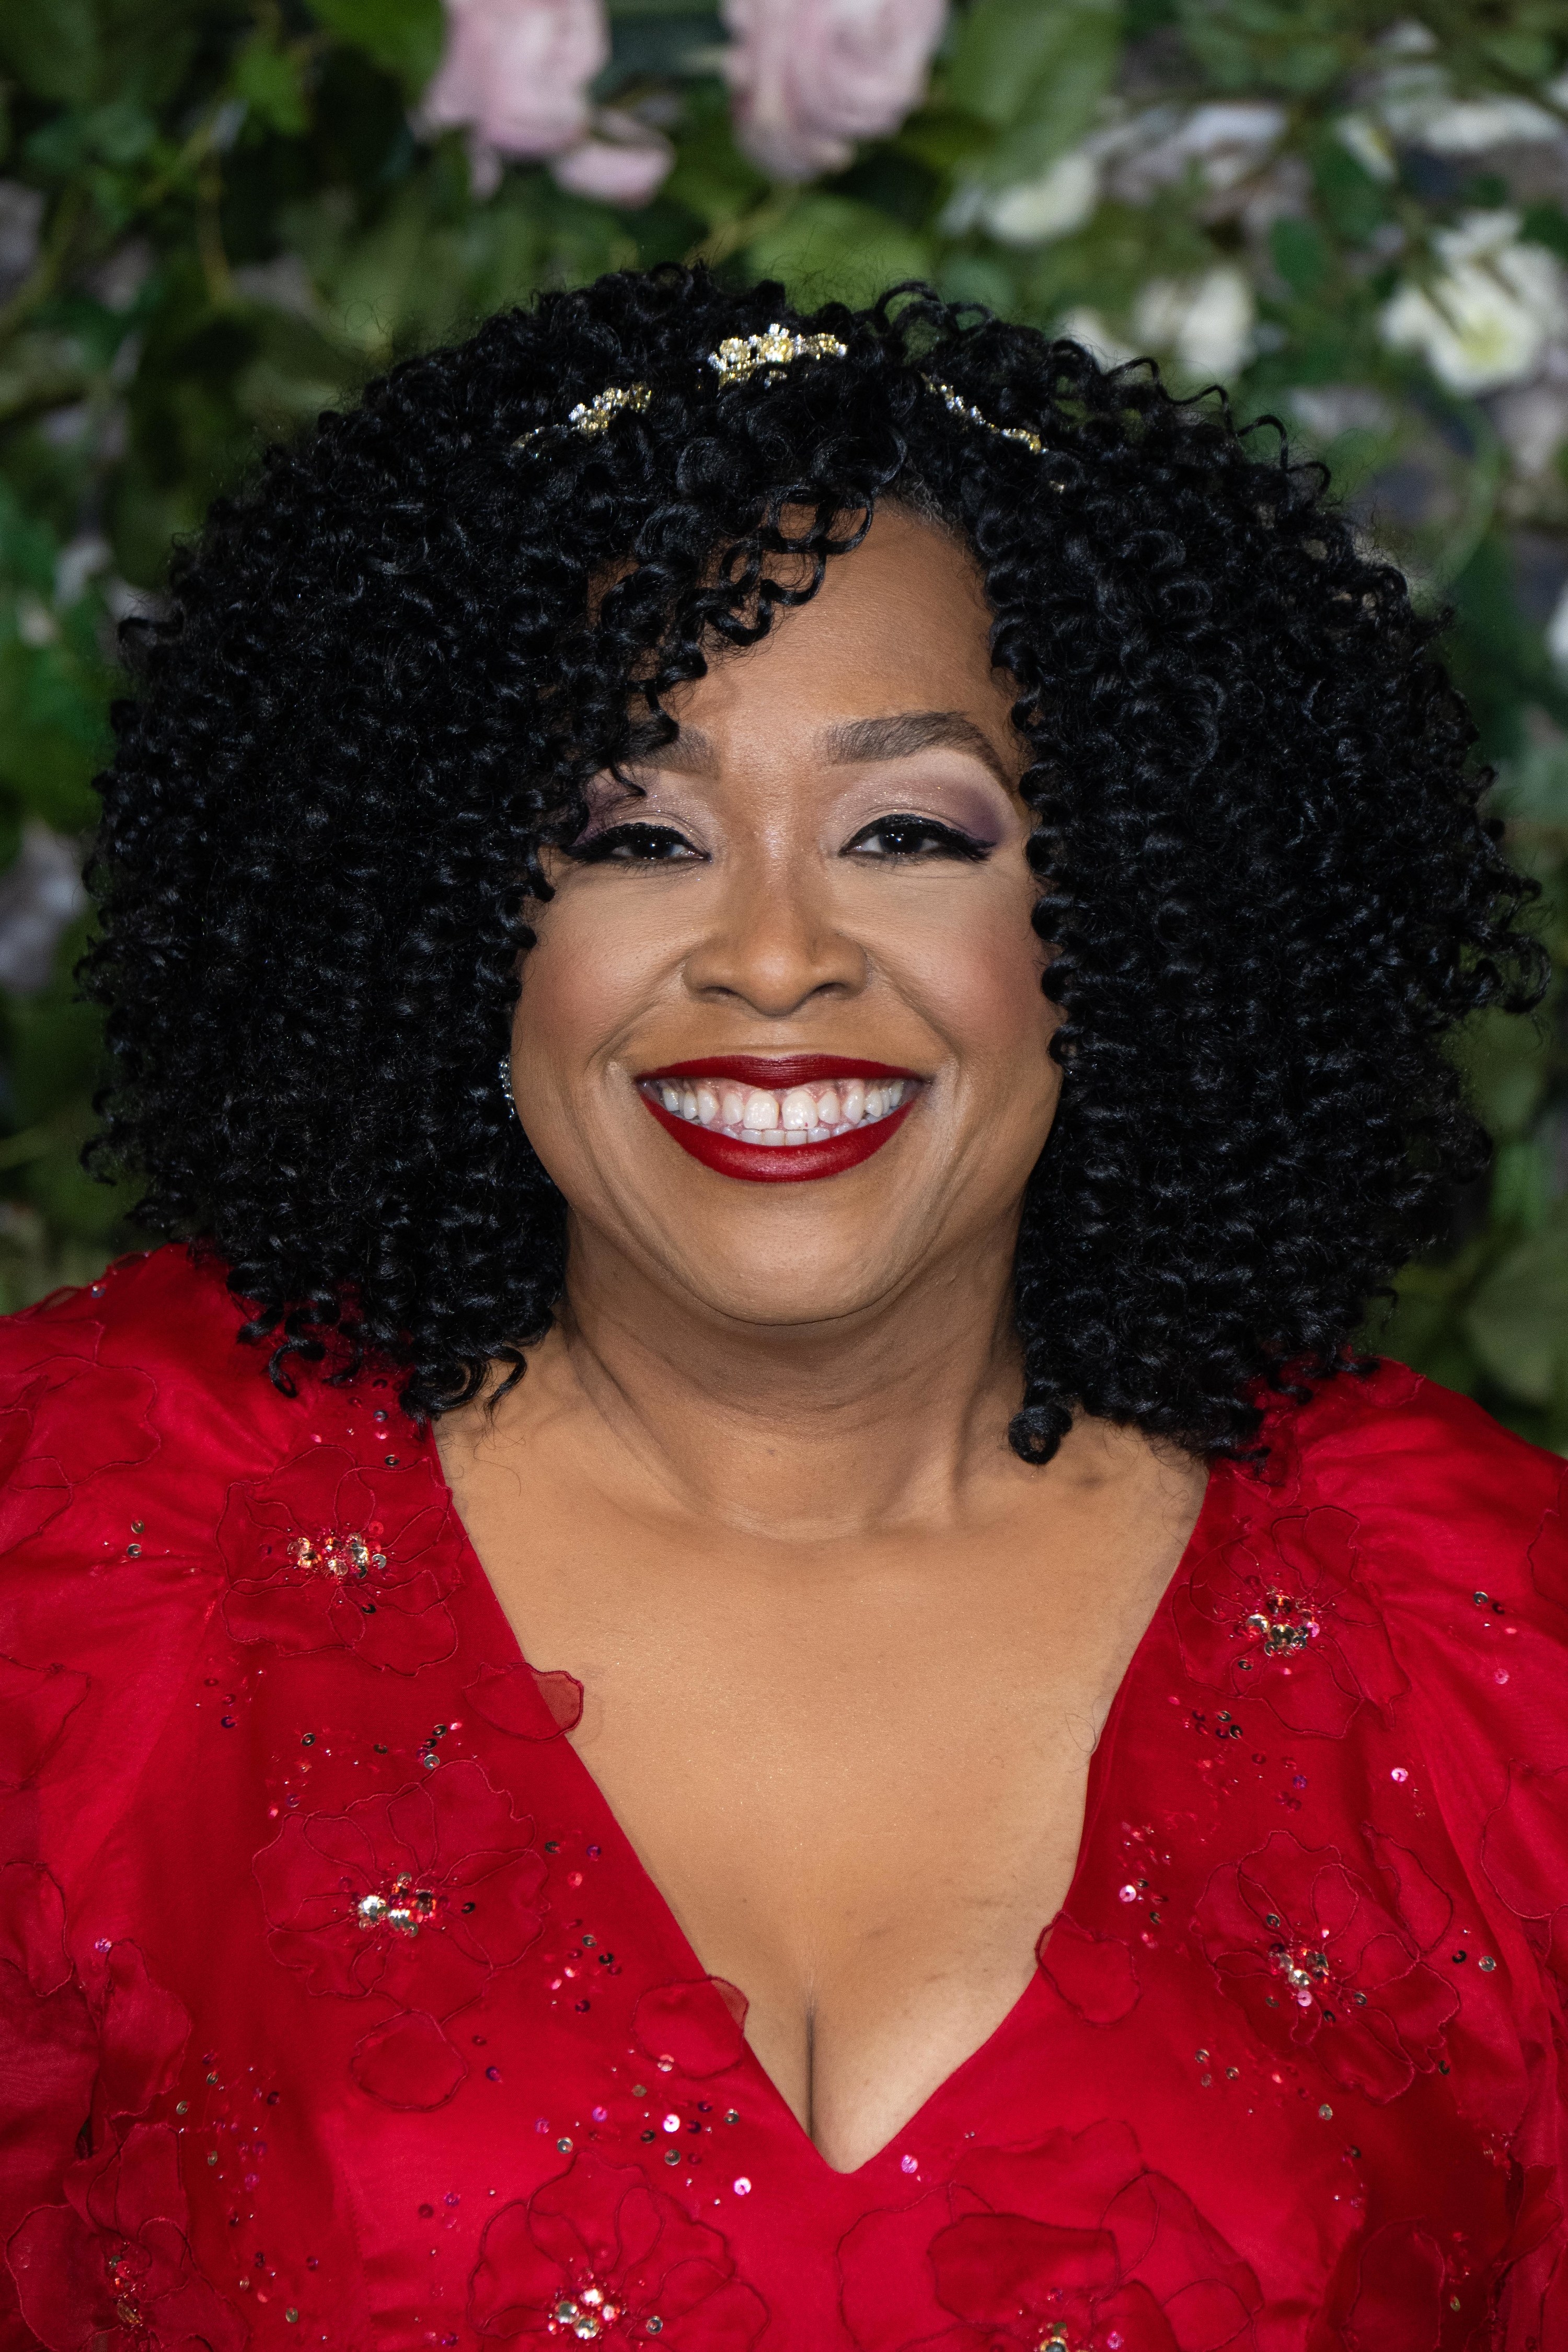 Shonda Rhimes smiling at an event